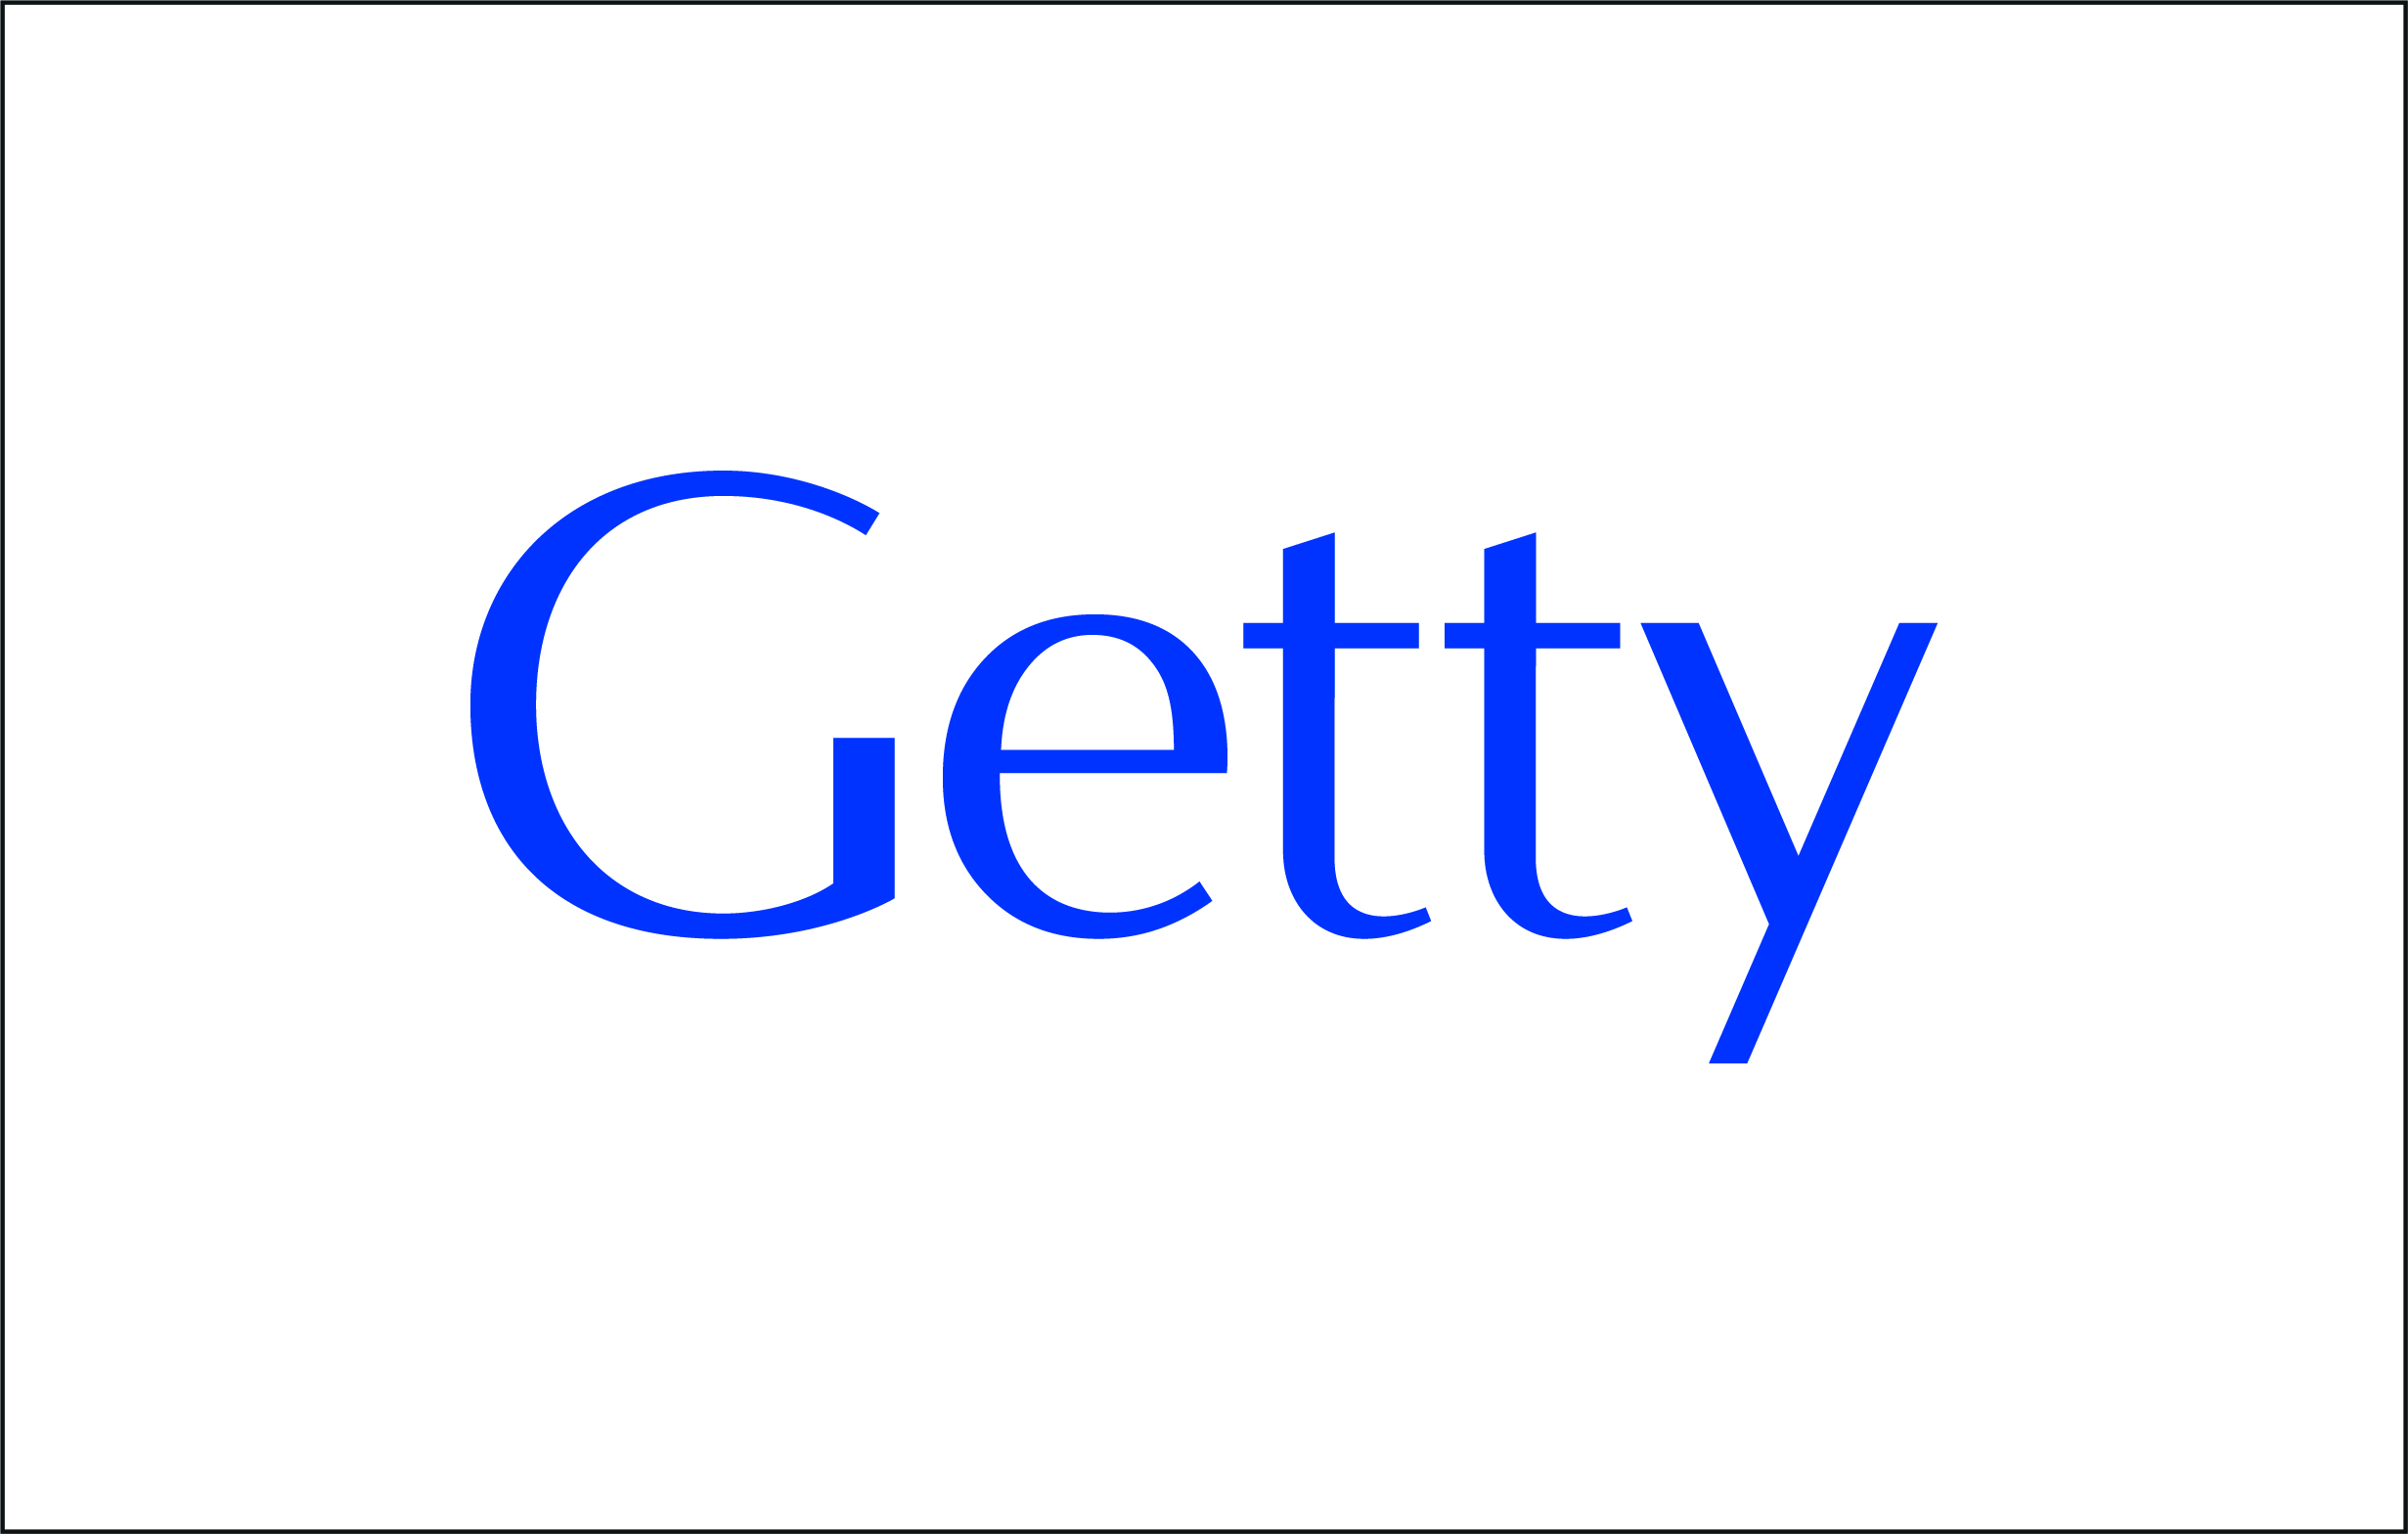 "Getty" in bright blue letters